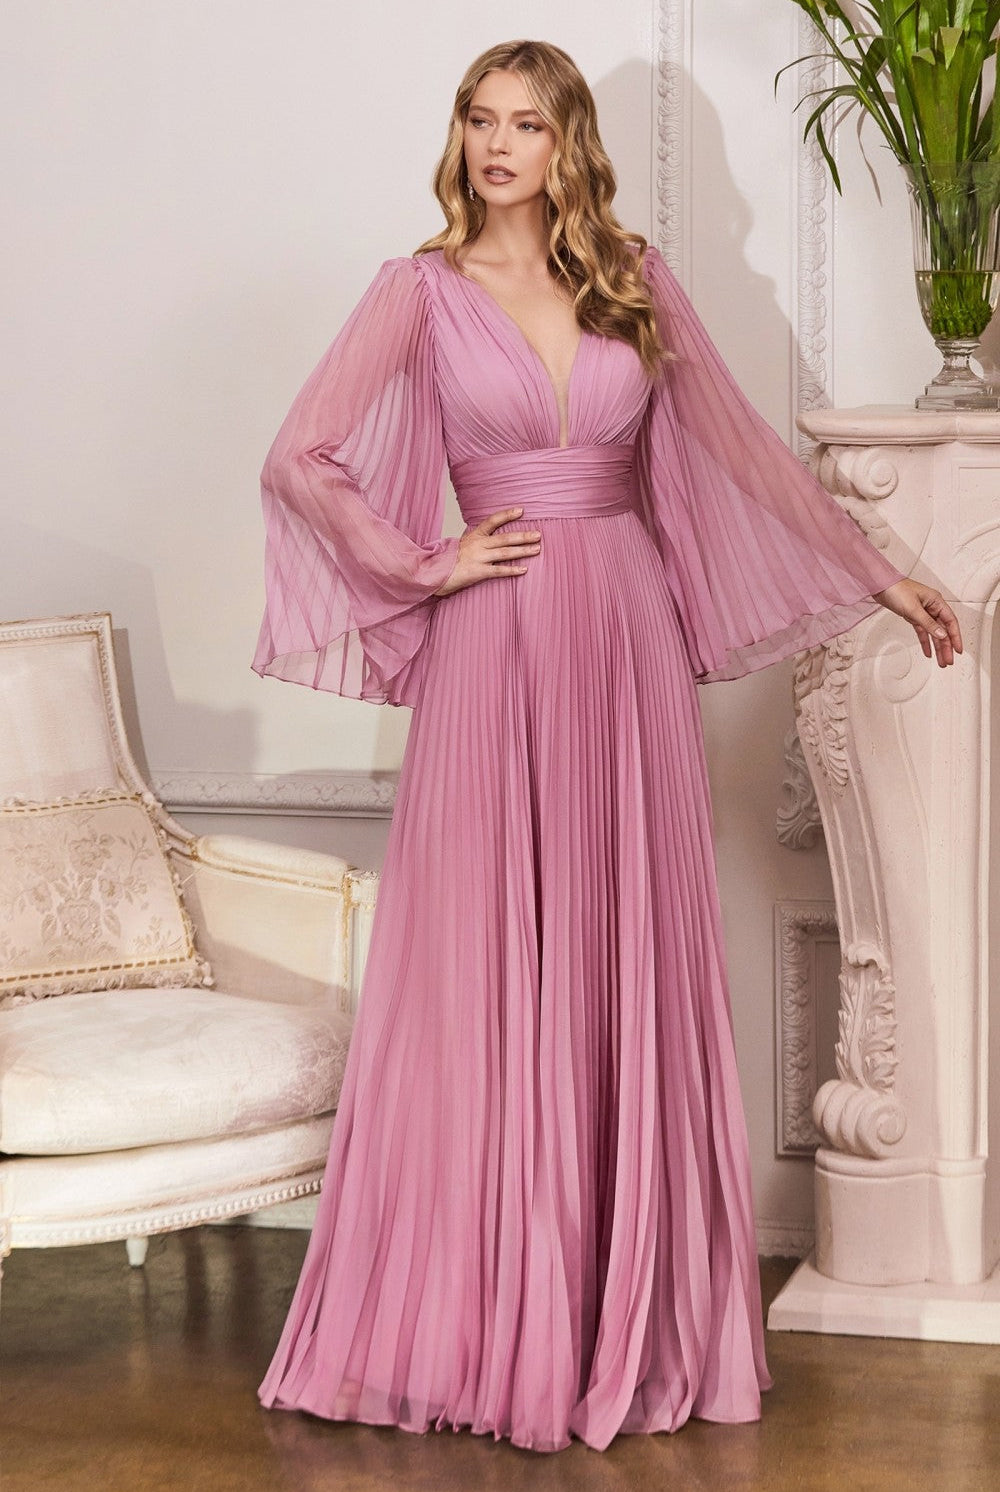 Pleated Chiffon Prom & Ball Gown Deep v-neckline Bodice with Open Back and Covered Shoulders Fairy Mother of the Bride Dress CDCD242 Sale-Bridesmaid Dress-smcfashion.com